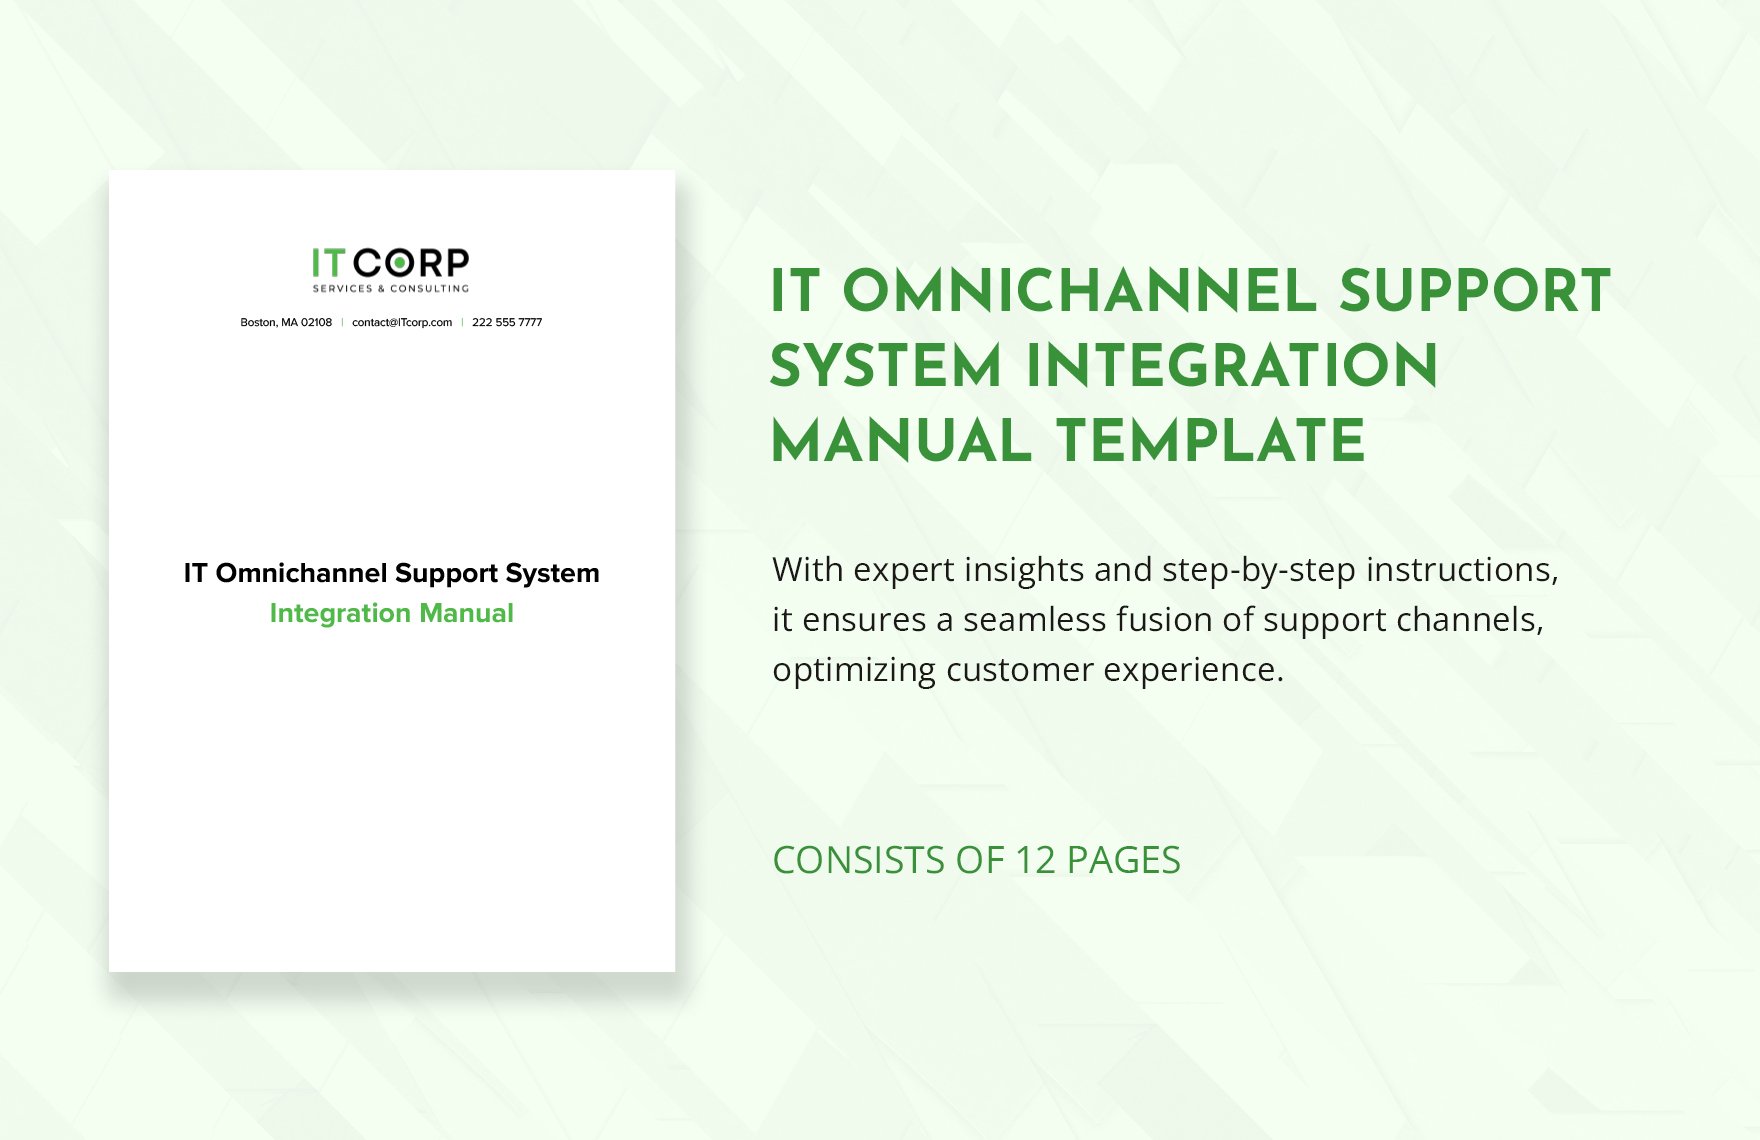 IT Omnichannel Support System Integration Manual Template